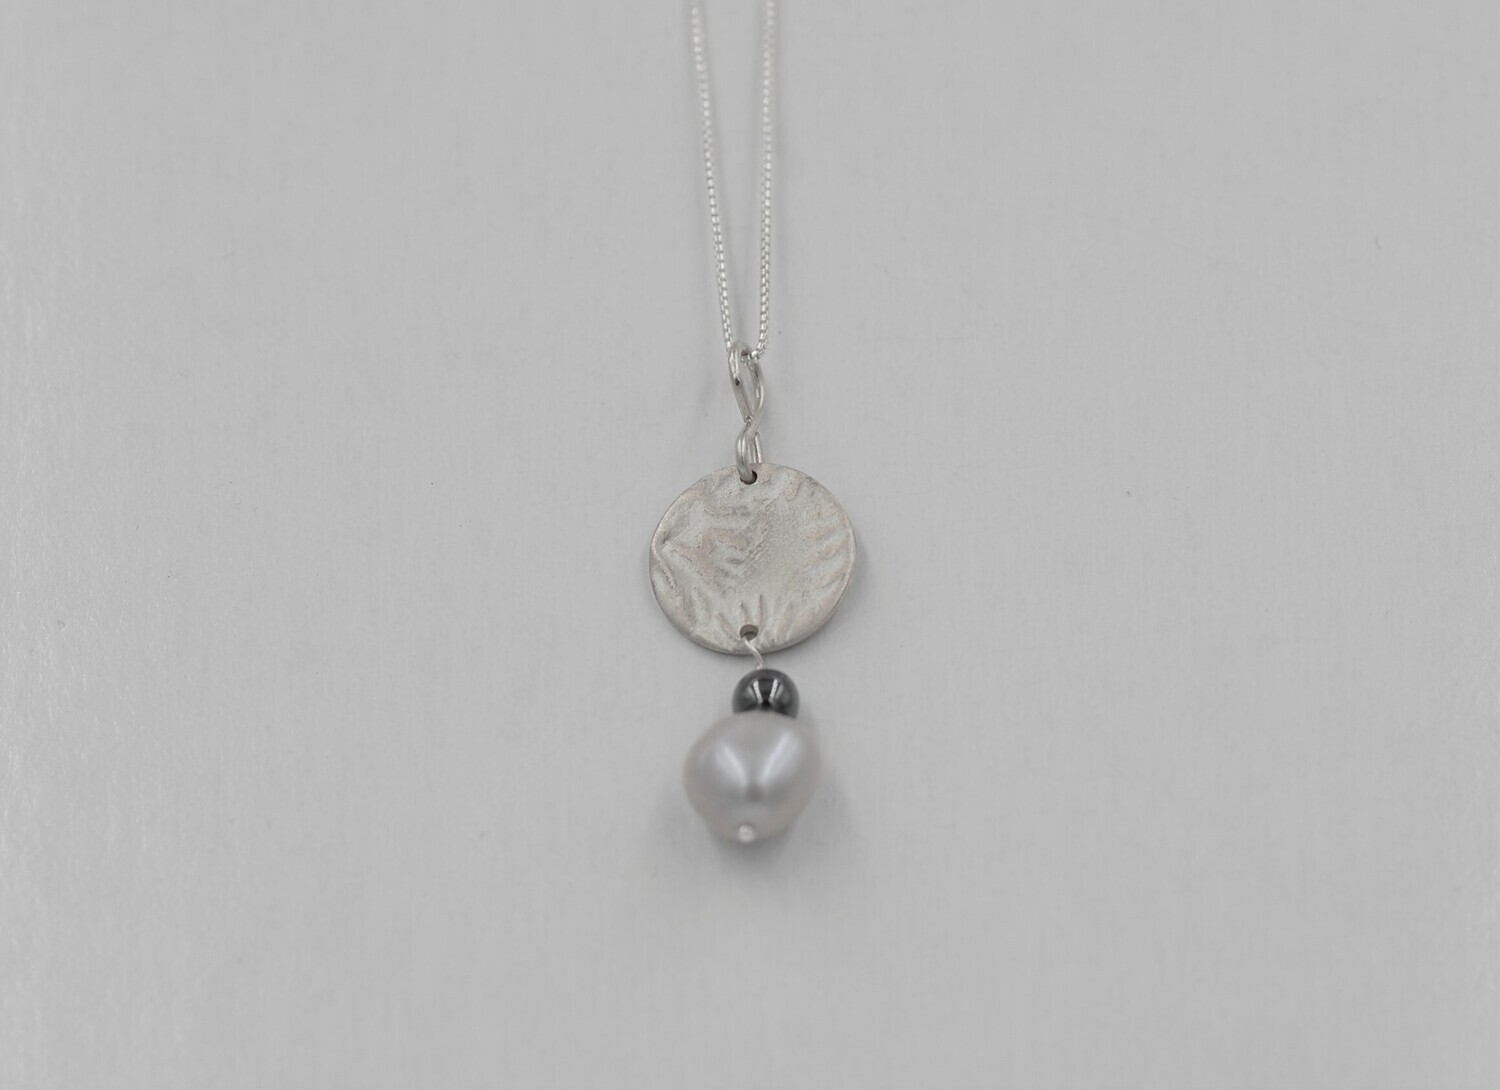 Grey pearl w/ hematite & reticulated sterling silver pendant - 18"